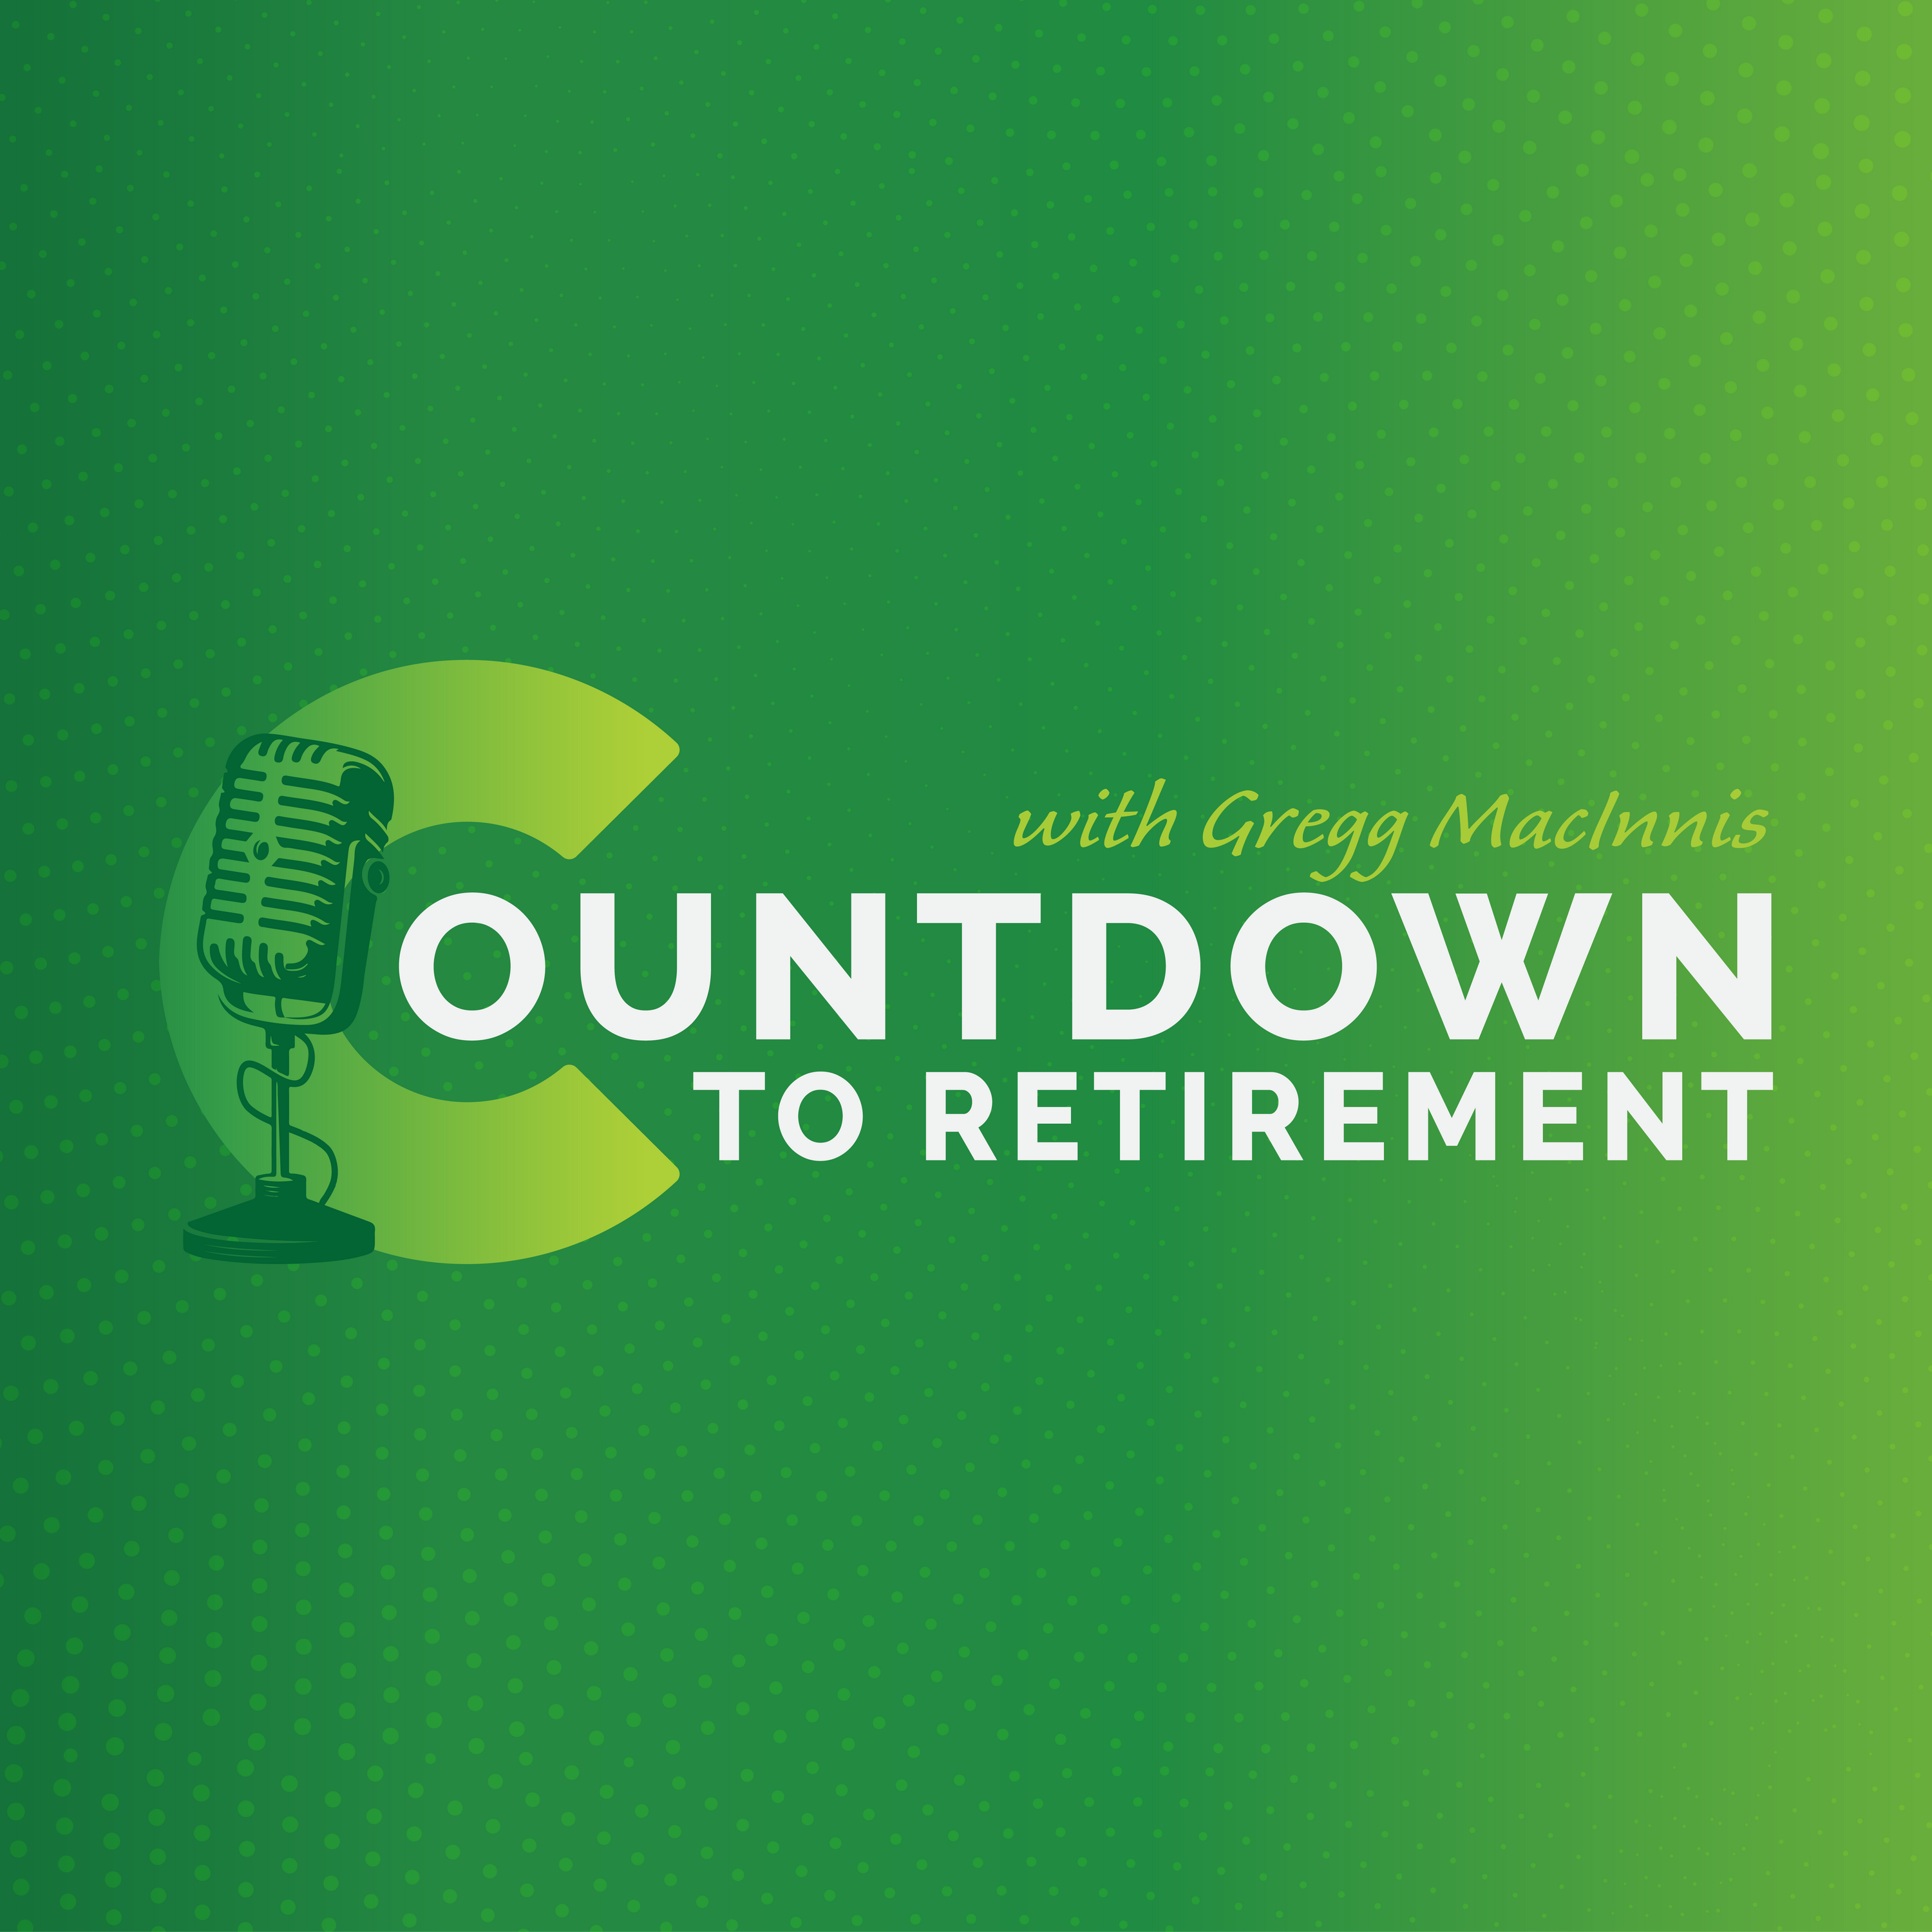 Have you made a tax plan for retirement?